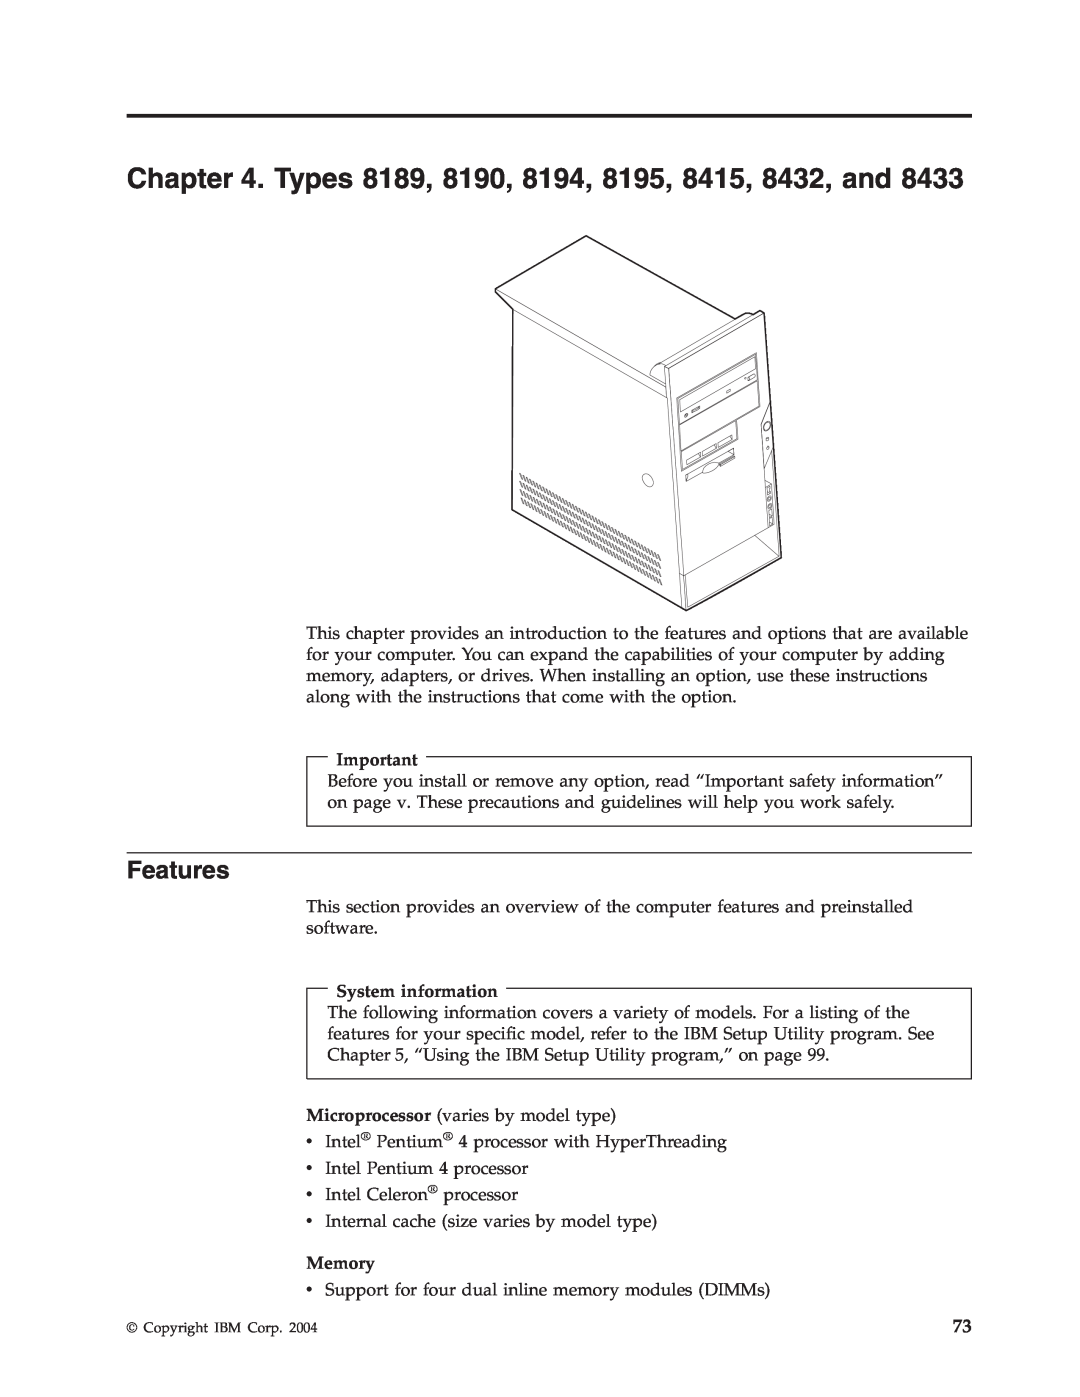 IBM 8188, 8128, 8185, 8186, 8187 manual Types 8189, 8190, 8194, 8195, 8415, 8432, and, Features, System information, Memory 